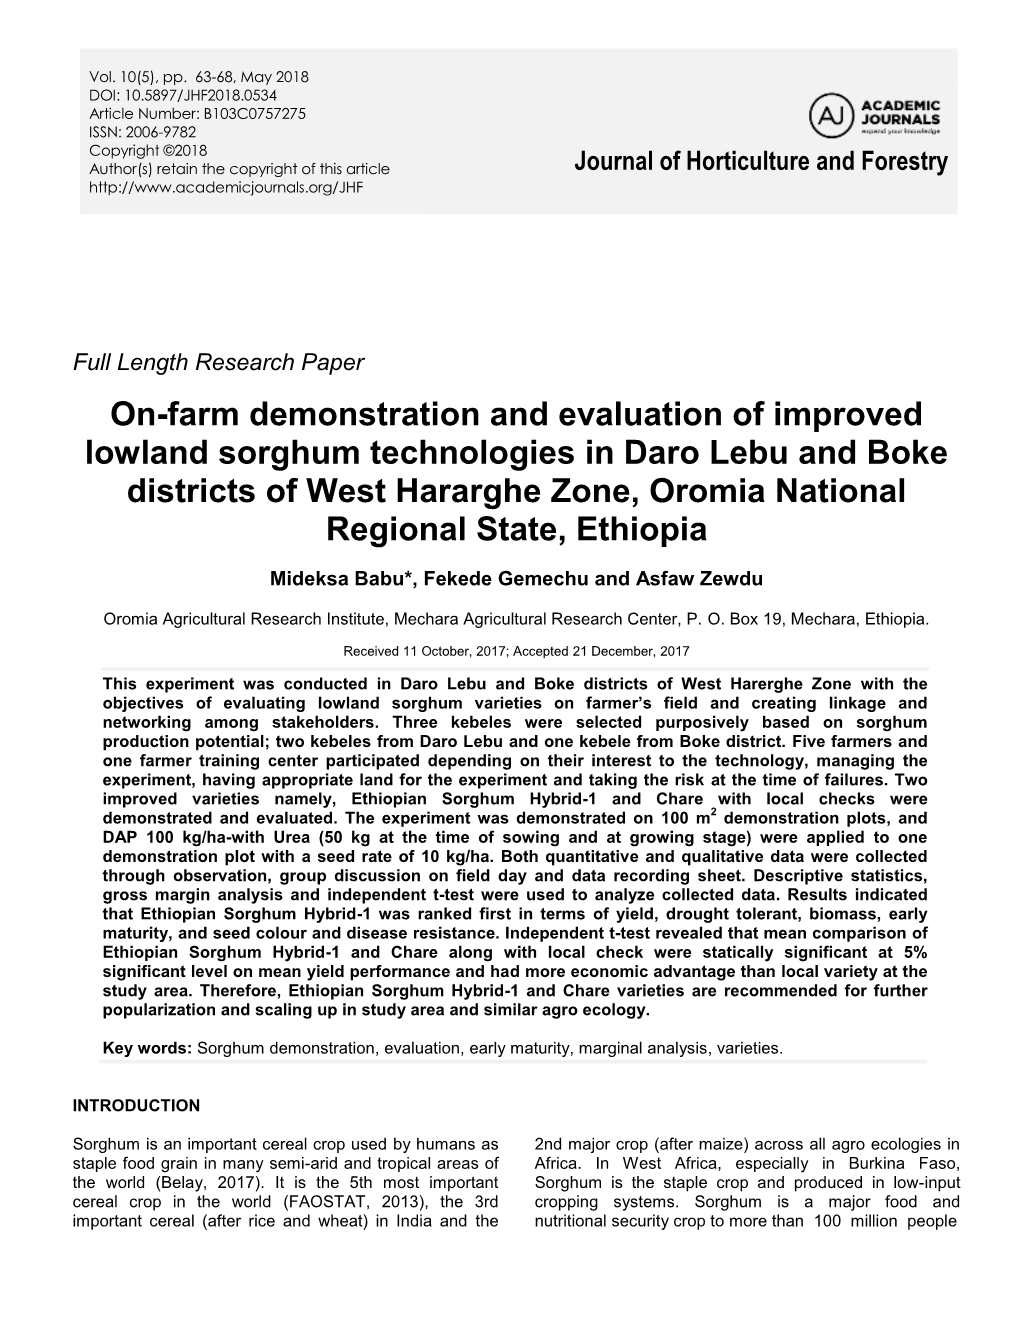 On-Farm Demonstration and Evaluation of Improved Lowland Sorghum